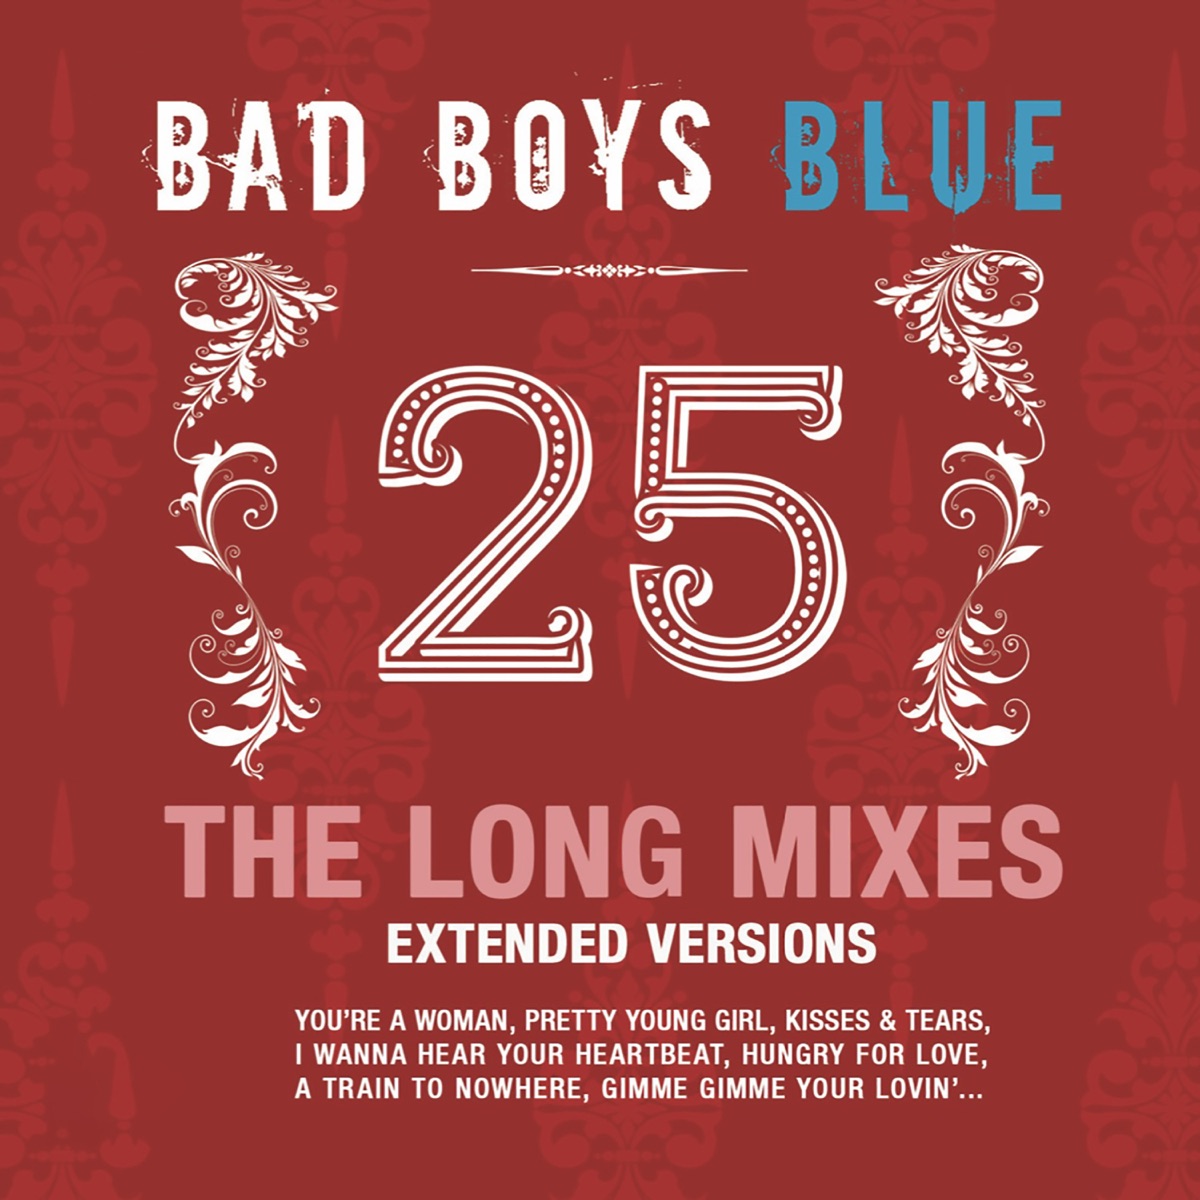 25 (The Long Mixes) by Bad Boys Blue on Apple Music